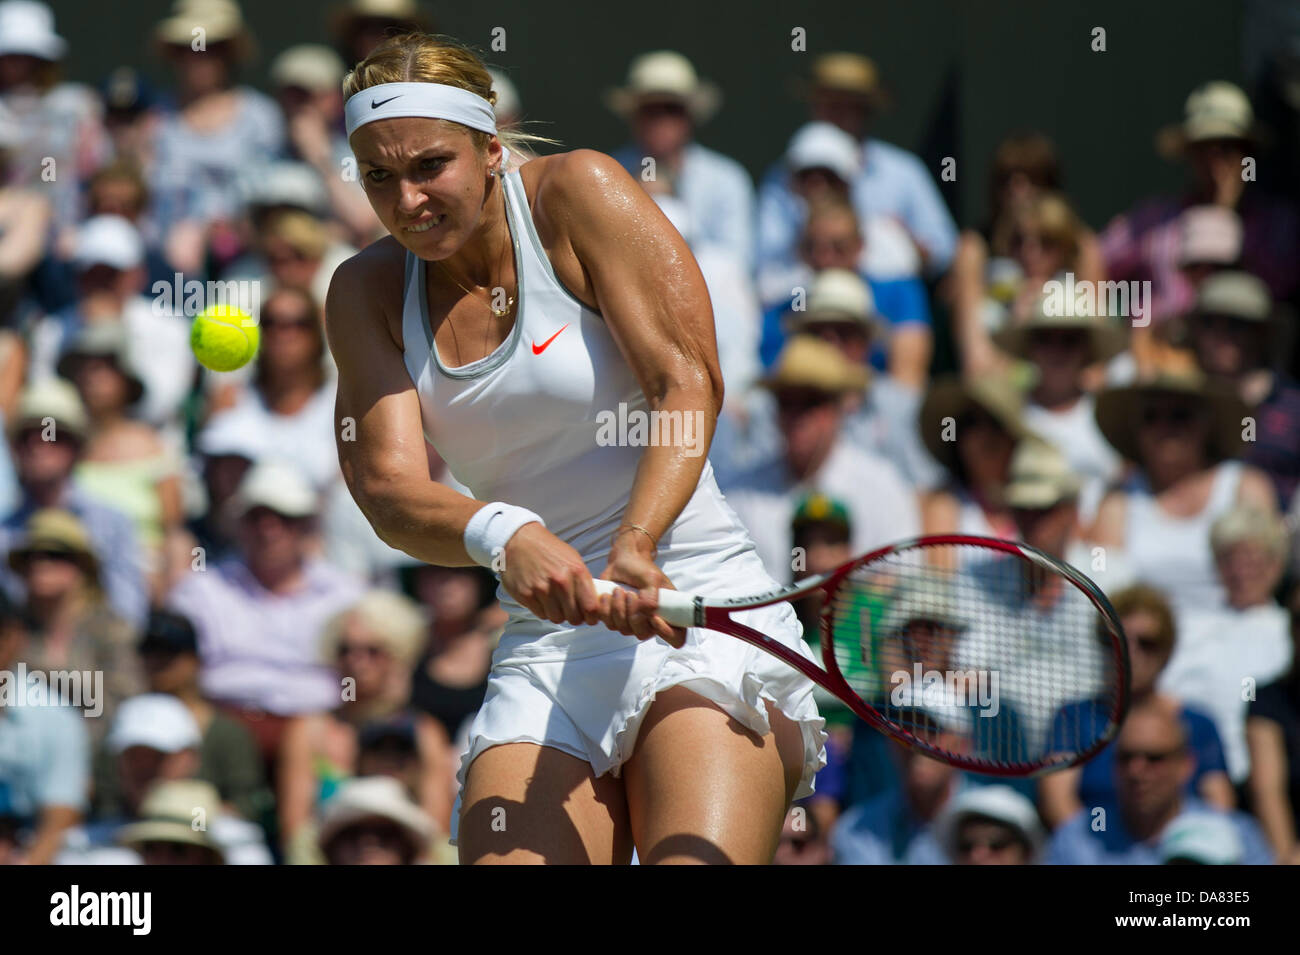 London, UK. 06th July, 2013. Tennis: Wimbledon Championship 2013, Sabine Lisicki of Germany in action during the Ladies' Singles final match against Marion Bartoli of France on day twelve of the Wimbledon Lawn Tennis Championships at the All England Lawn Tennis and Croquet Club on July 6, 2013 in London, England. Credit:  dpa picture alliance/Alamy Live News Stock Photo